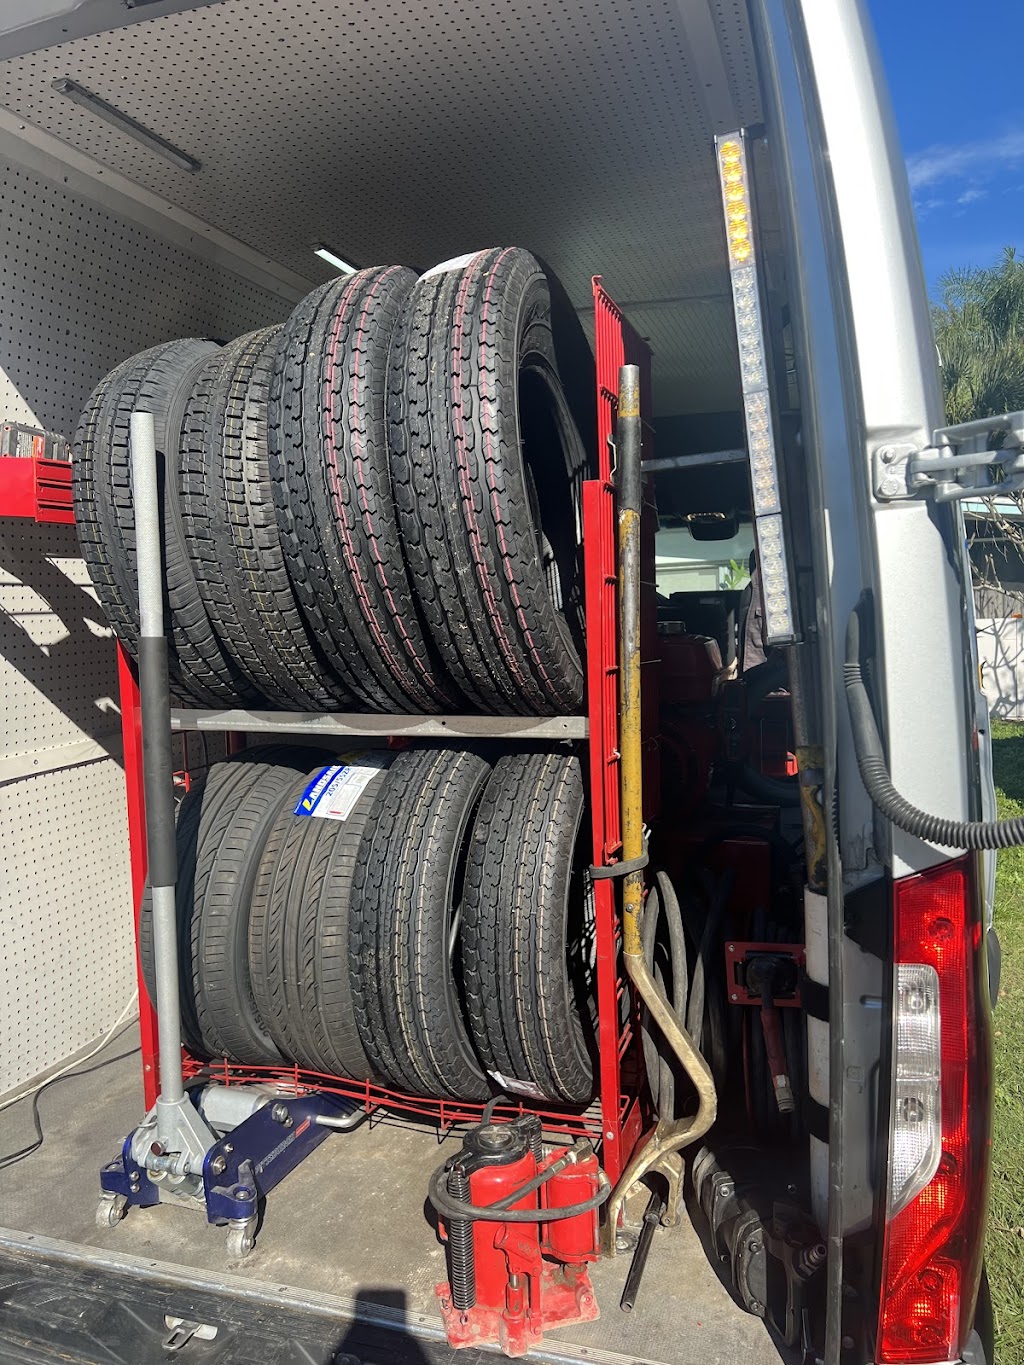 A&M tire solution and mobile service | Only Mobile service, 624 N Conrad Ave, Sarasota, FL 34237, USA | Phone: (941) 539-3795